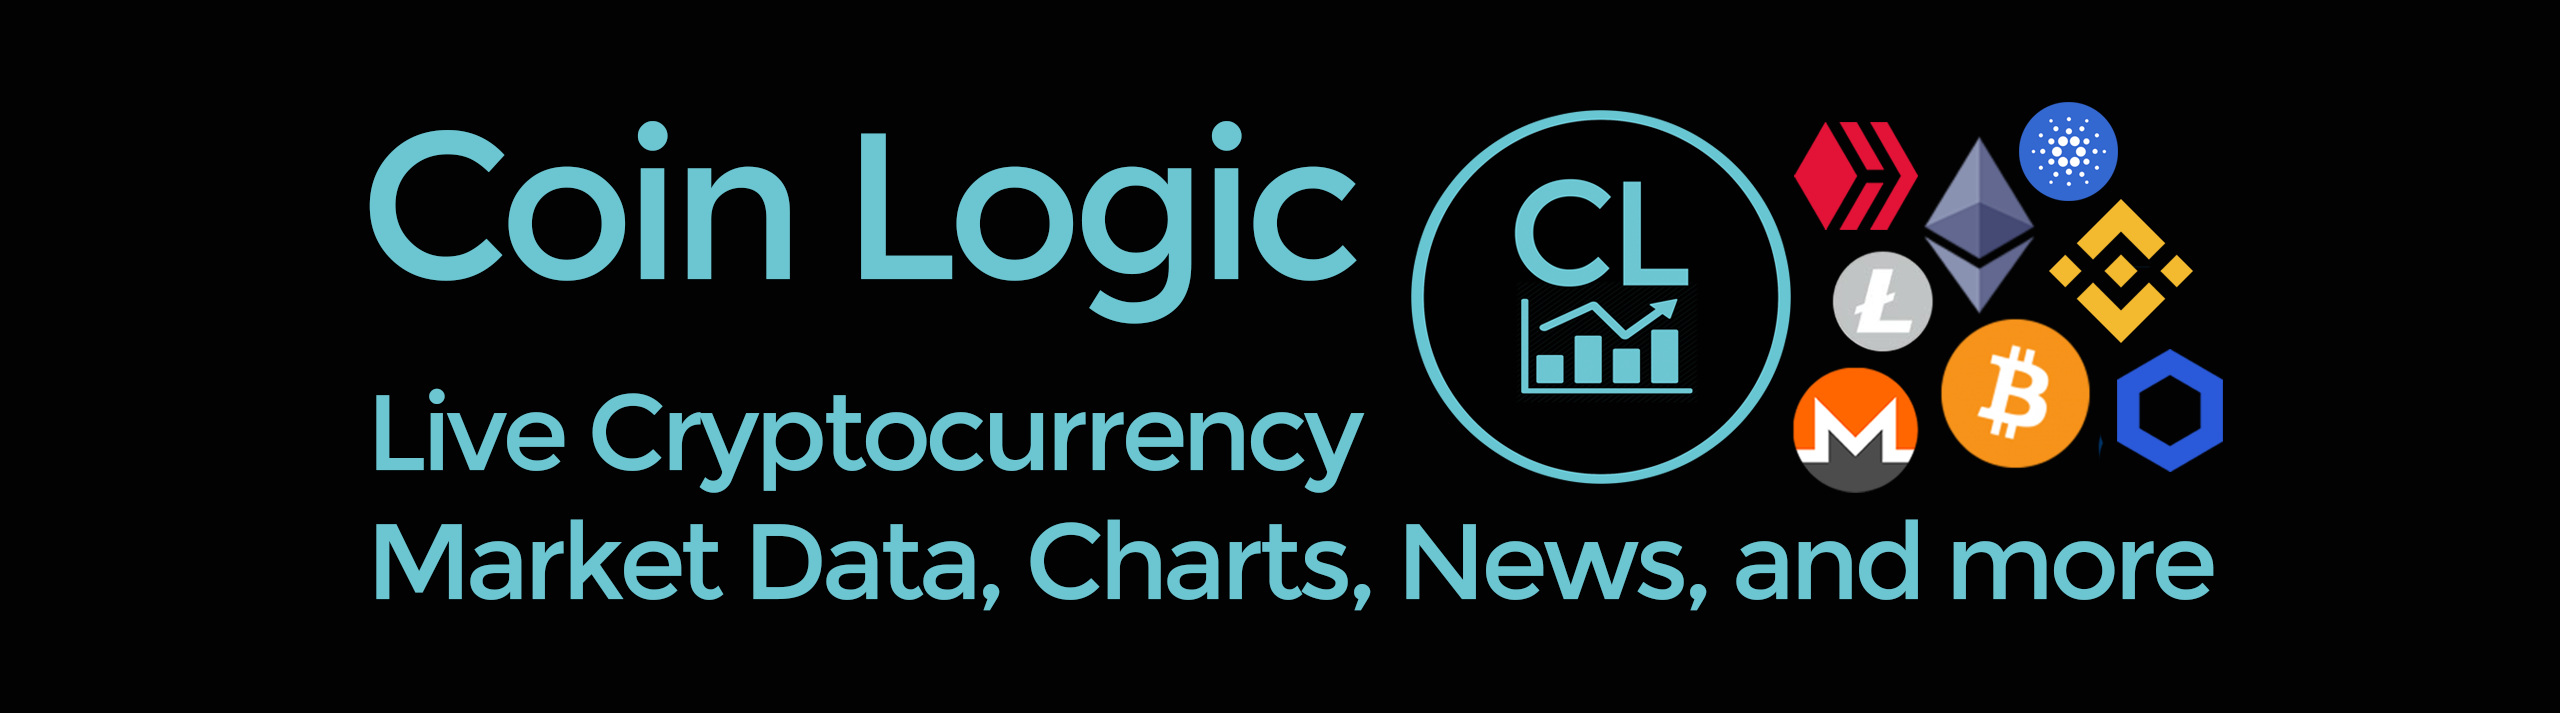 Coin Logic cryptocurrency news market data banner Genesis bankruptcy Nexo fines